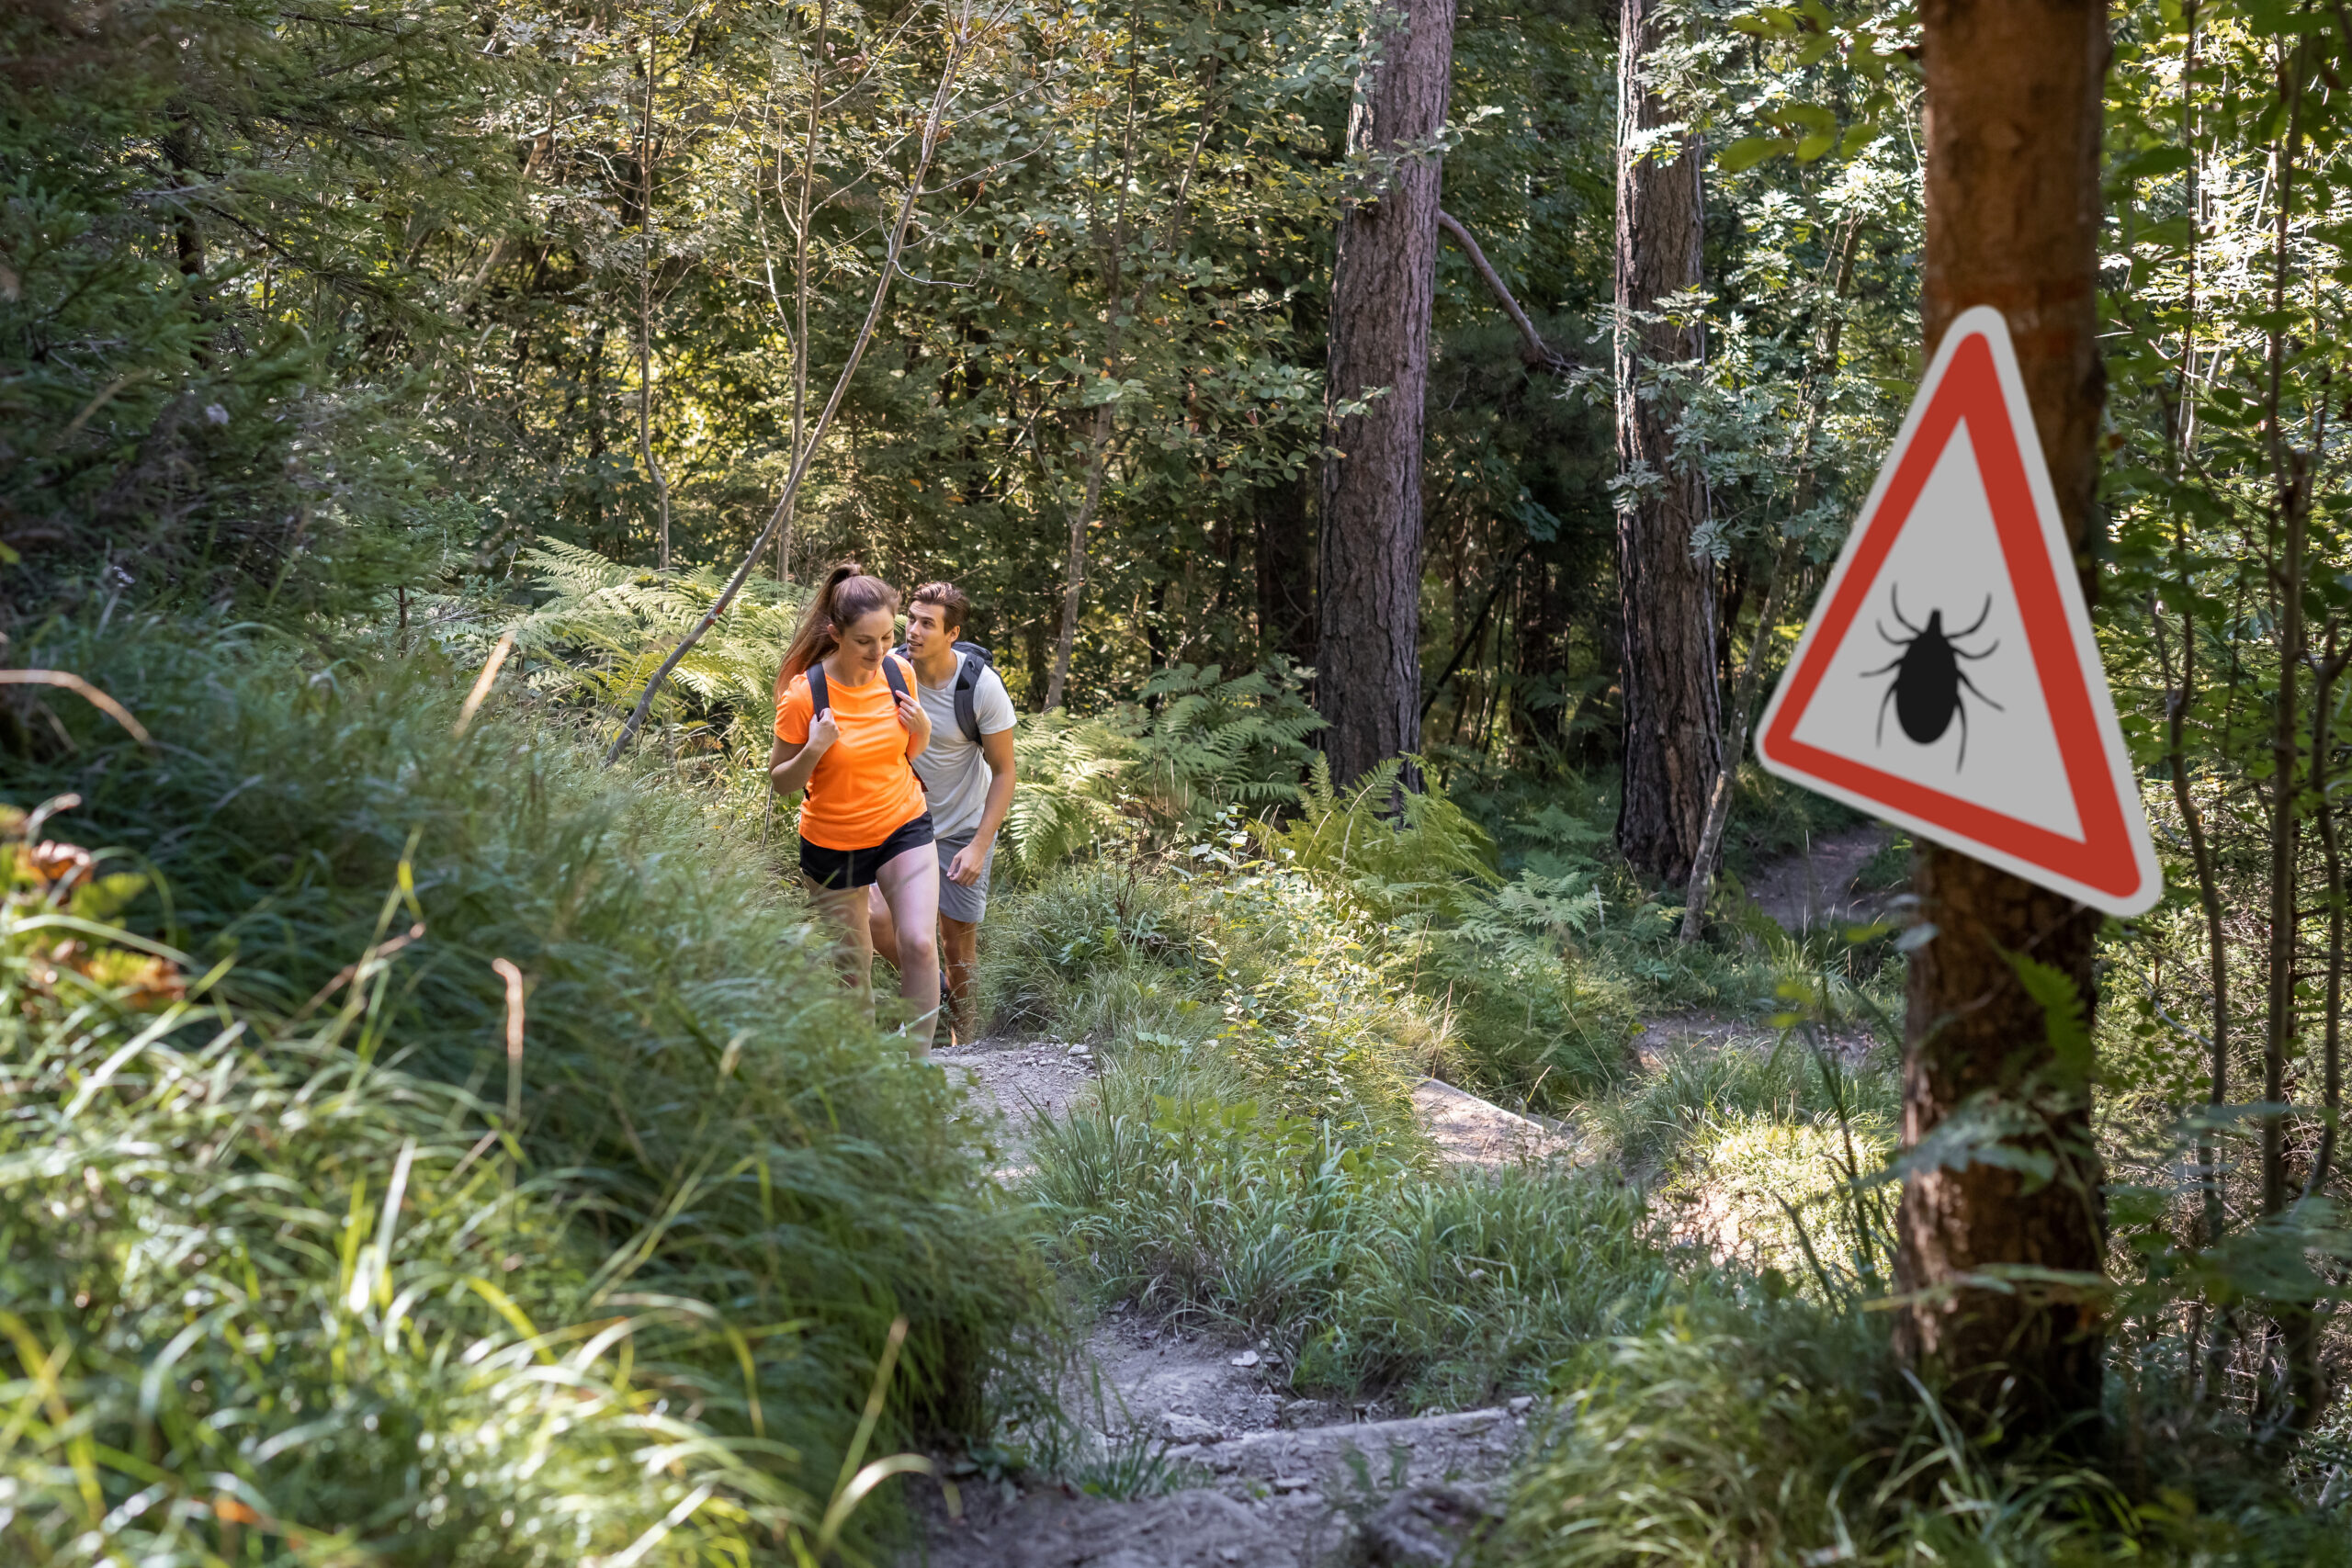 Man and woman hiking in Infected ticks forest with warning sign. Risk of tick-borne and lyme disease.